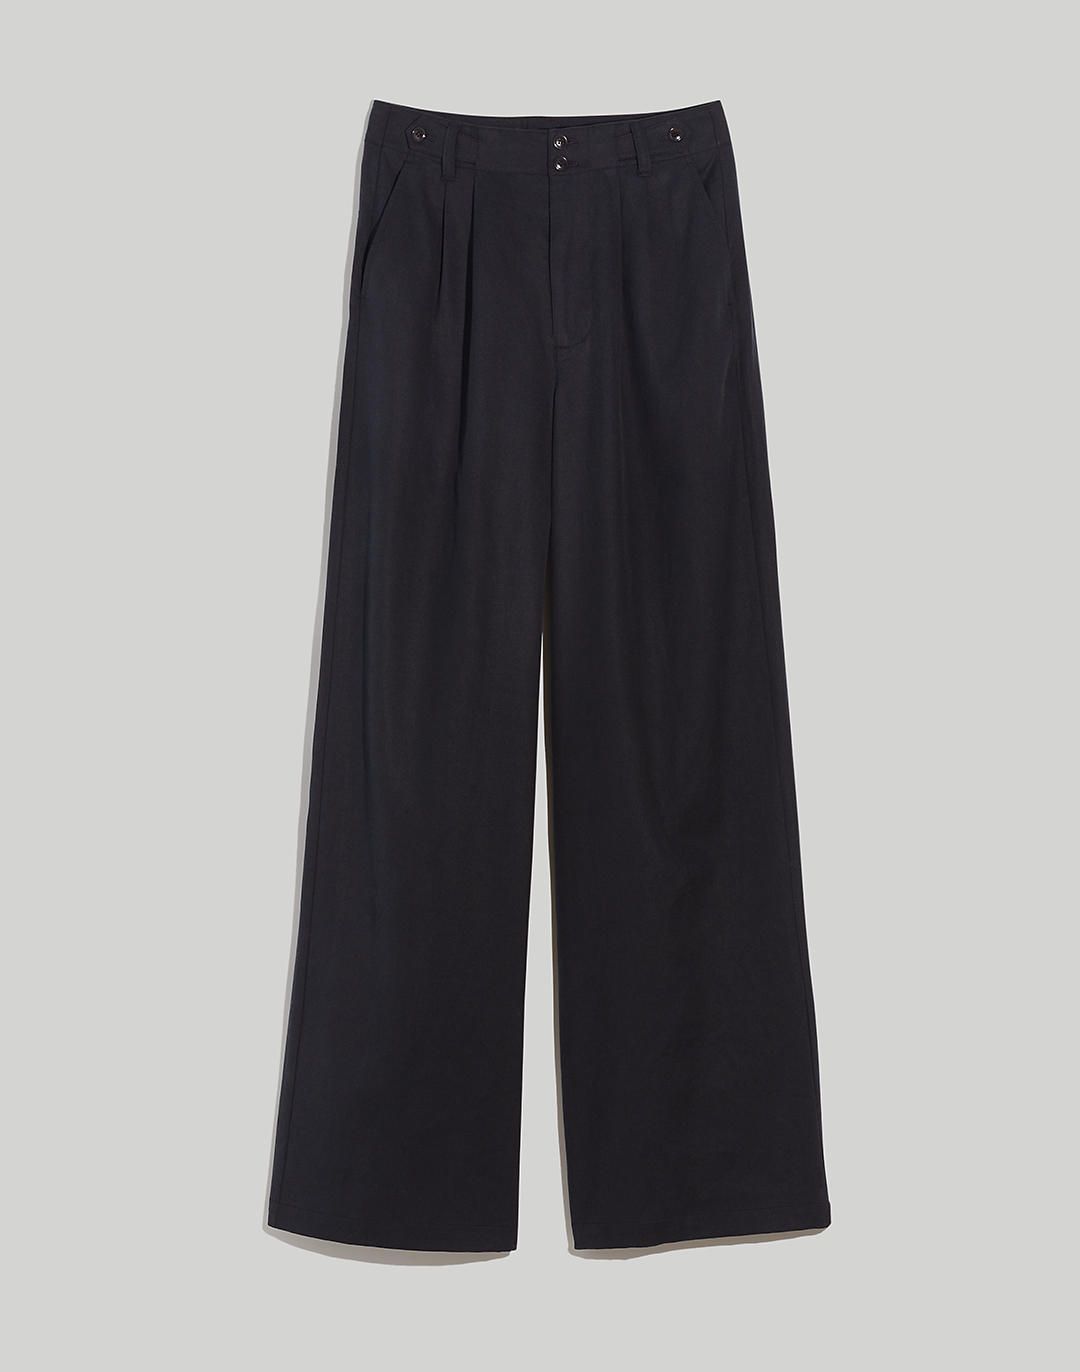 The Plus Harlow Wide-Leg Pant | Madewell